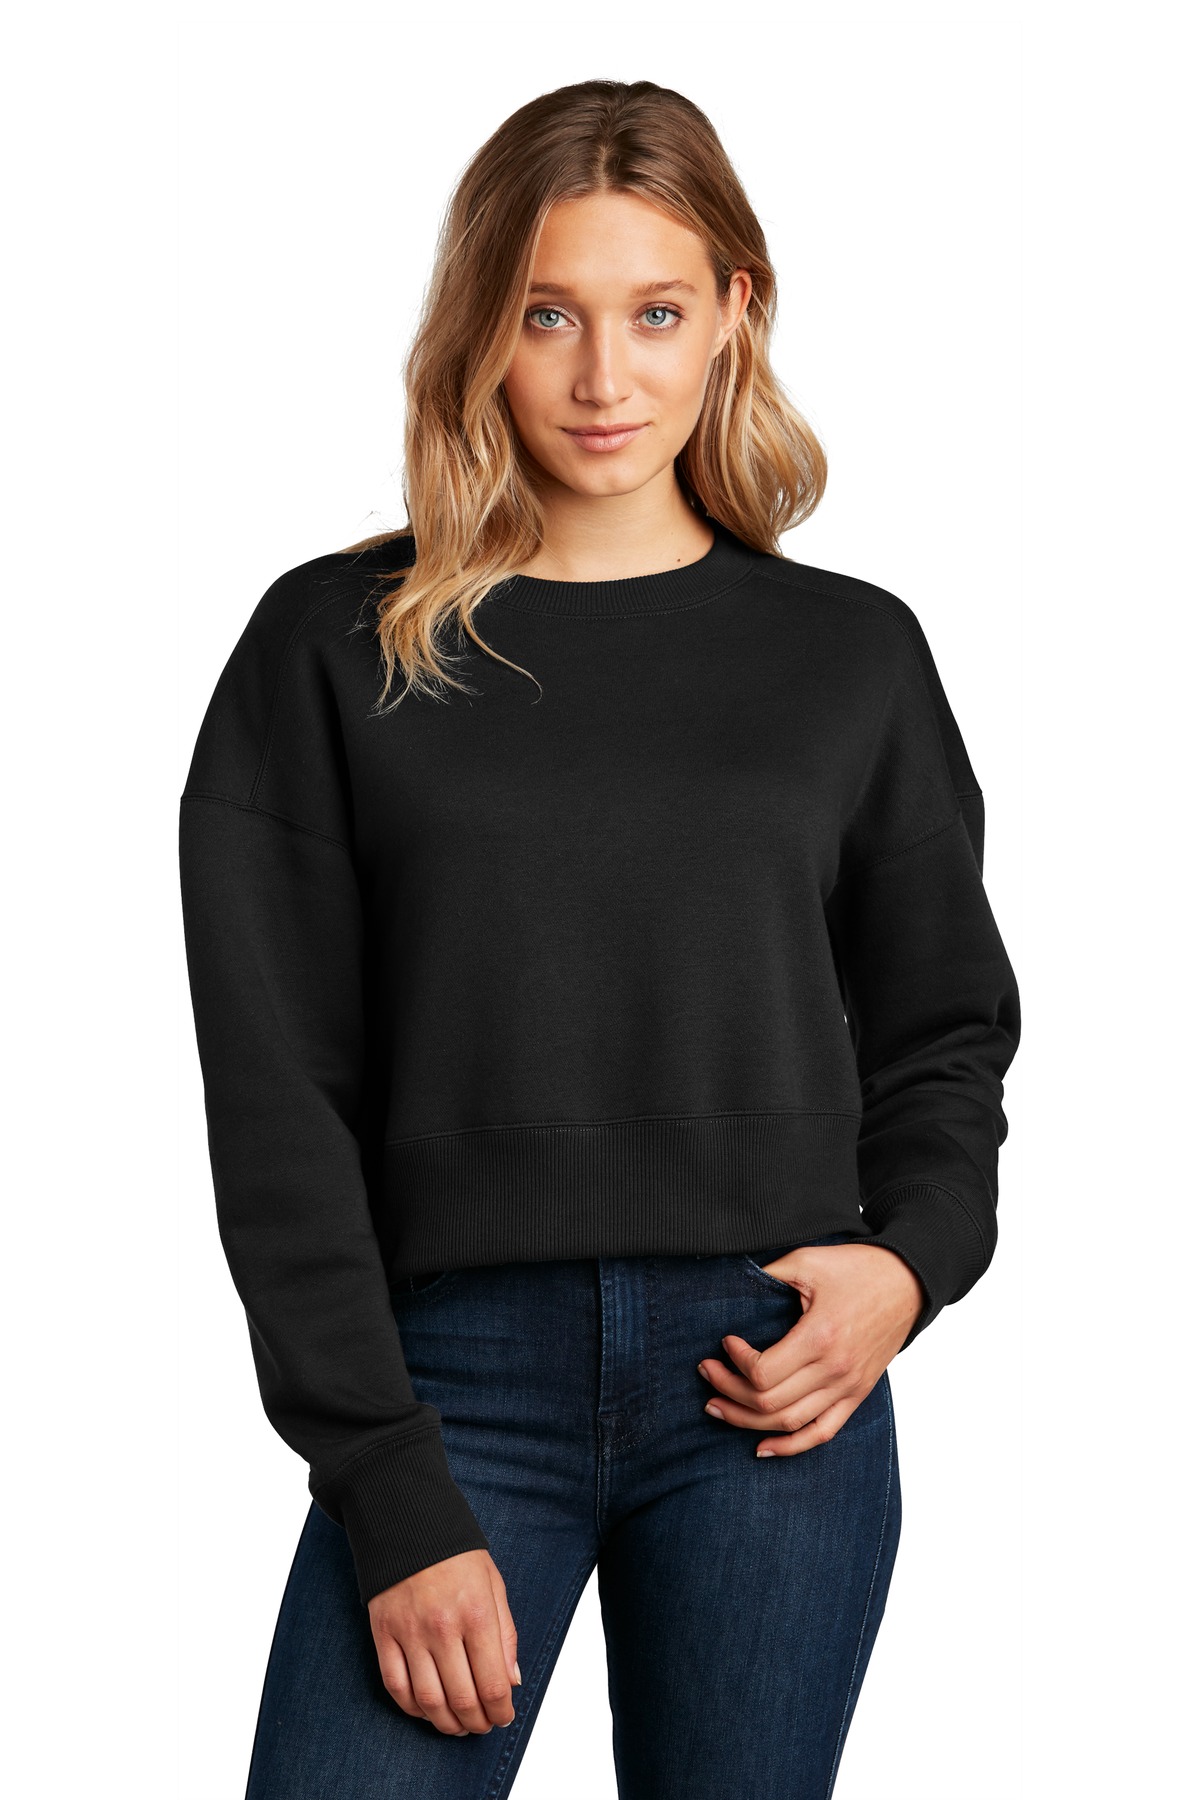 District Women's Perfect Weight Fleece Cropped Crew DT1105